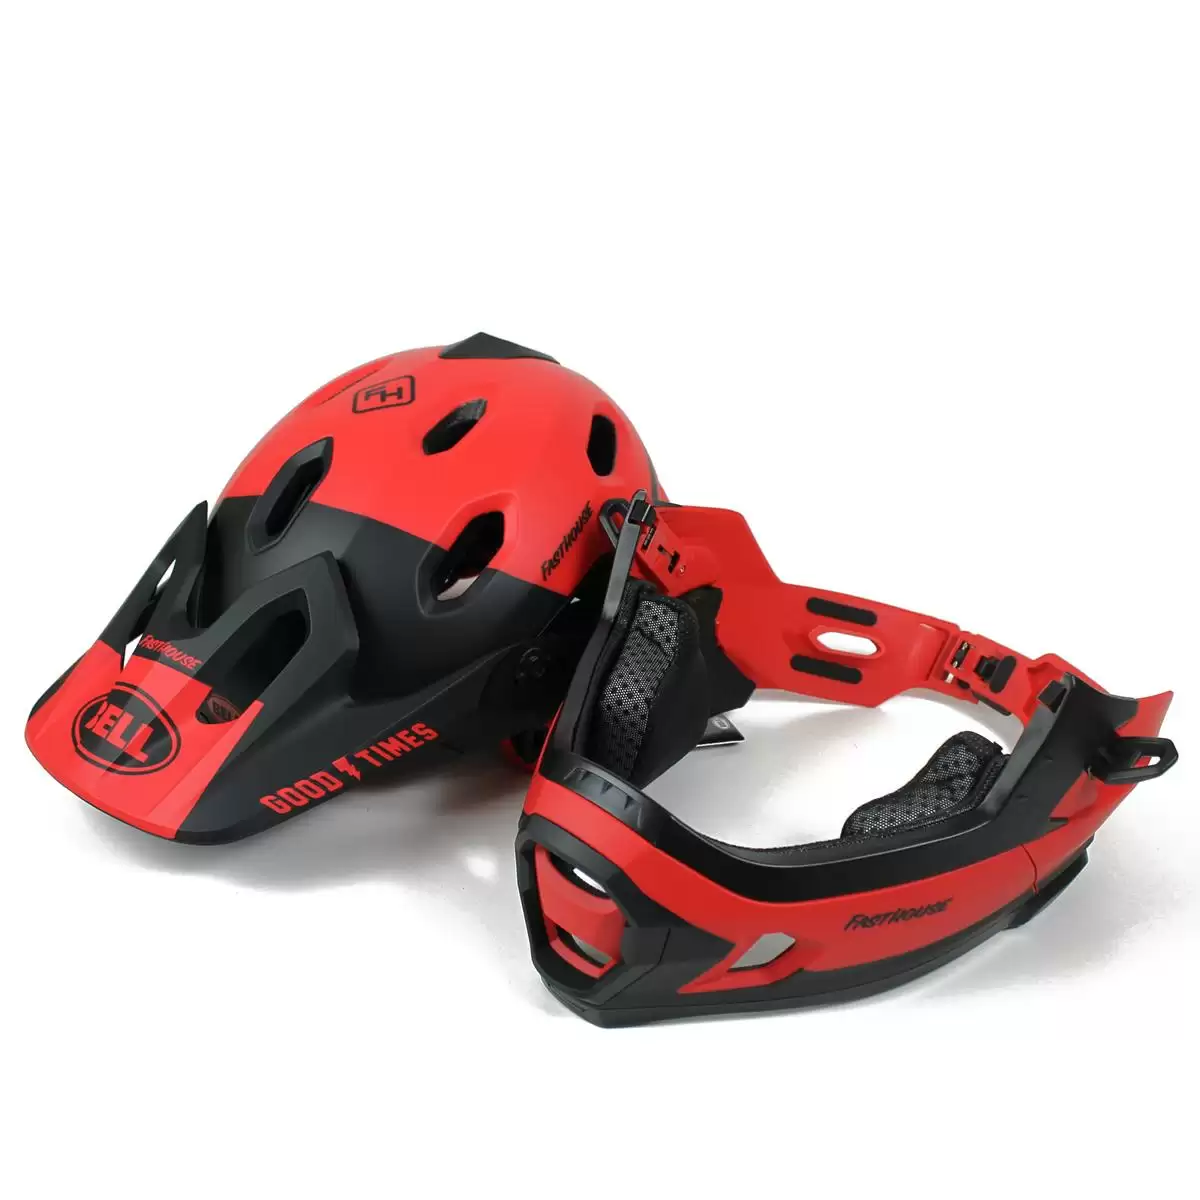 Helmet Super DH MIPS Fasthouse Red Size S (52-56cm) #9